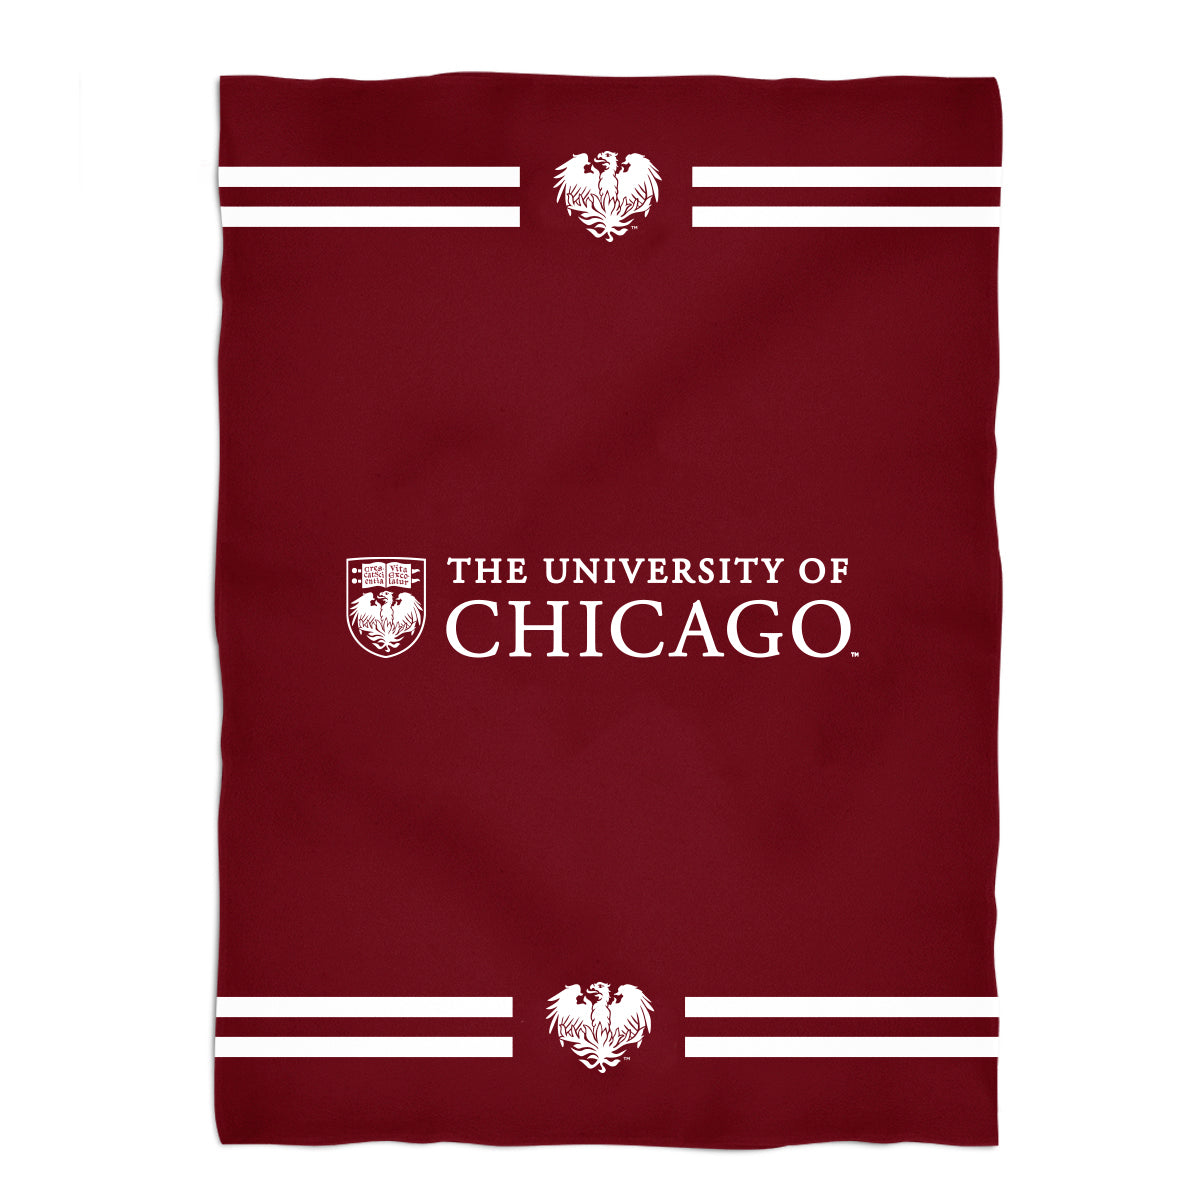 University of Chicago Maroons Game Day Soft Premium Fleece Maroon Throw Blanket 40 x 58 Logo and Stripes